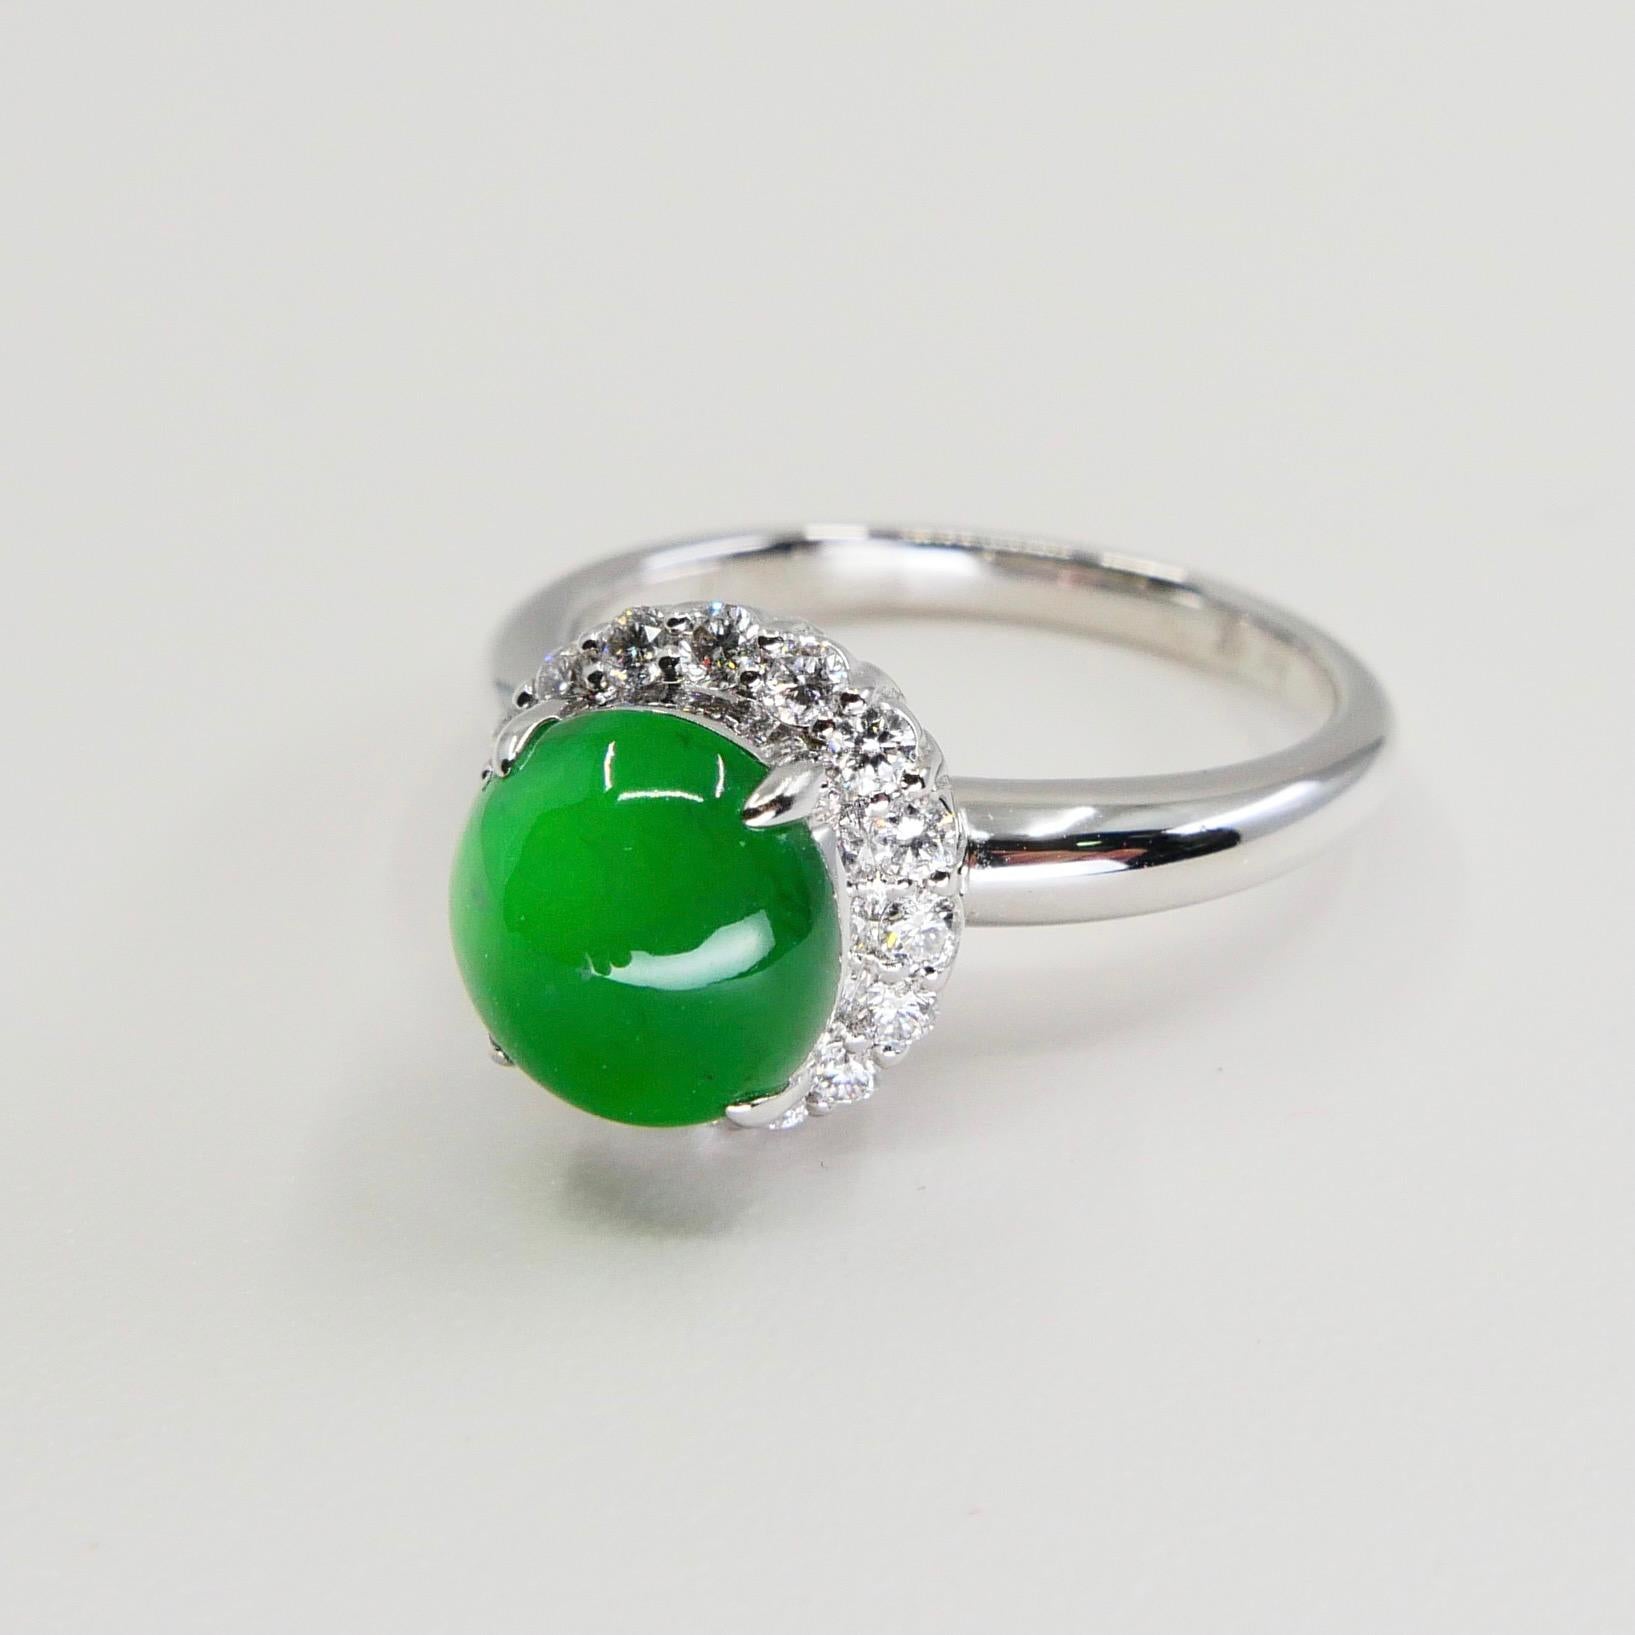 Cabochon Certified Type A Icy Apple Green Jadeite Jade and Diamond Ring, Super Glow For Sale